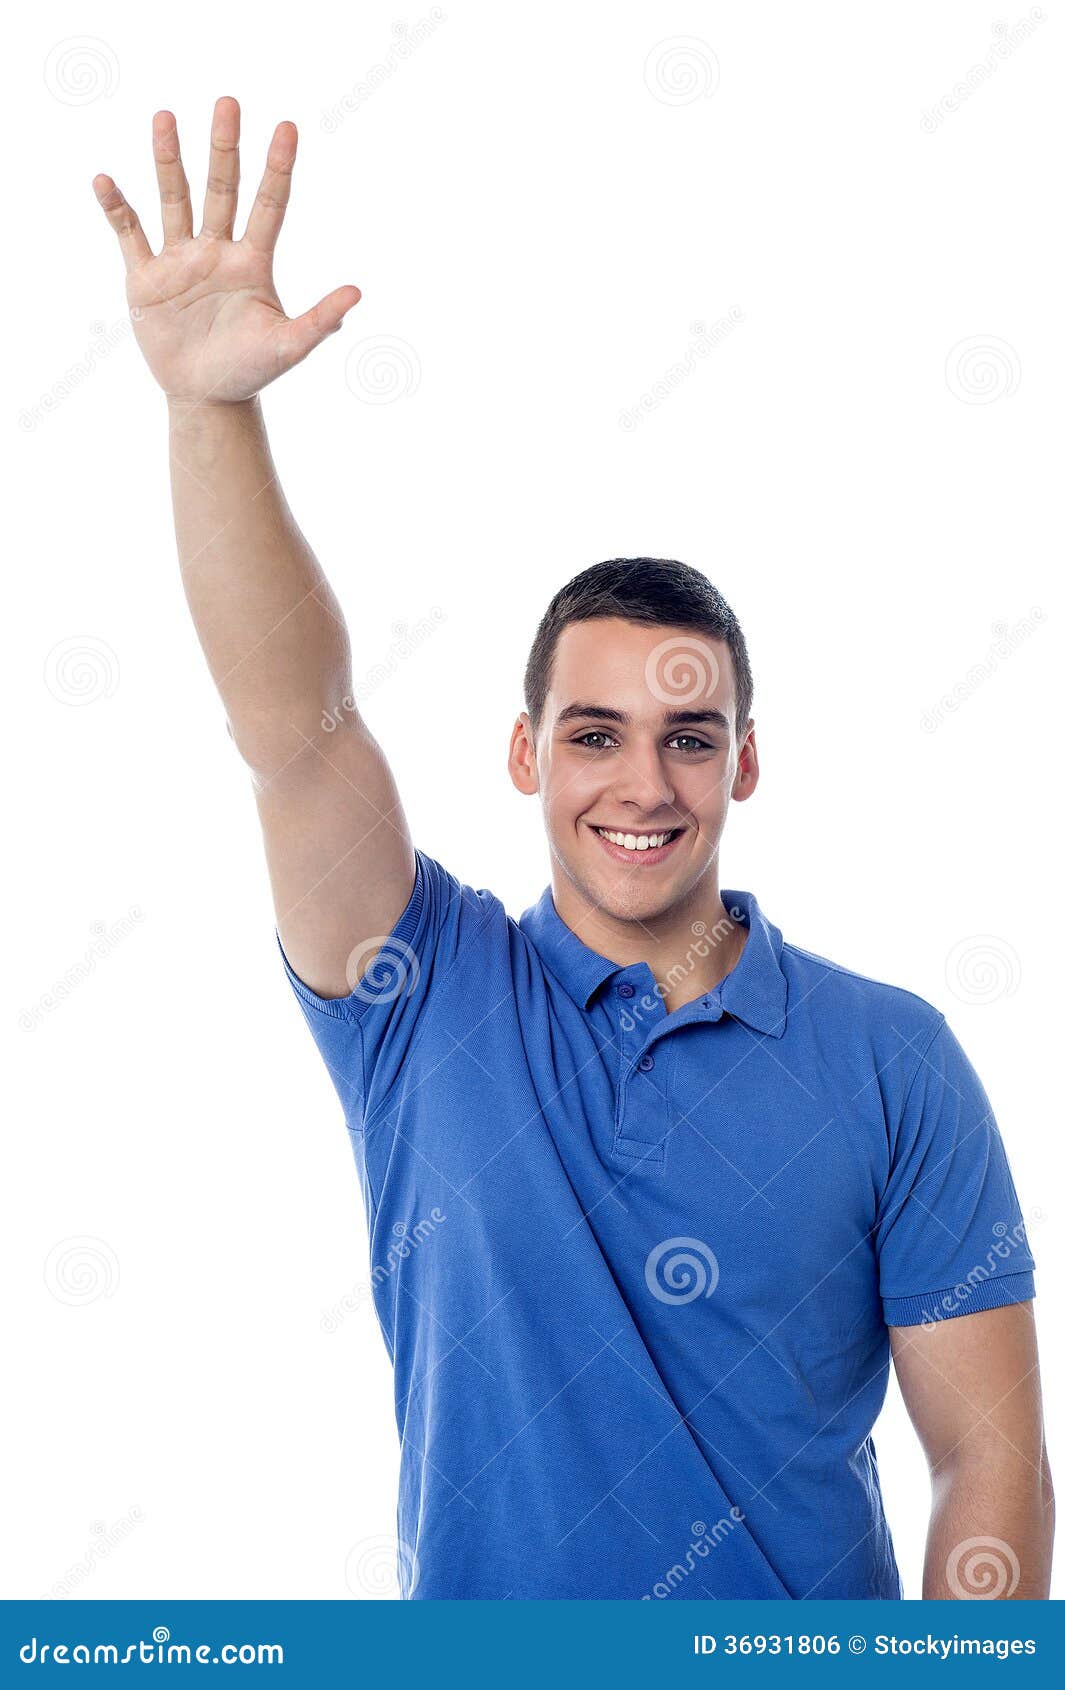 https://thumbs.dreamstime.com/z/young-guy-waving-hi-to-his-friend-handsome-man-friends-36931806.jpg